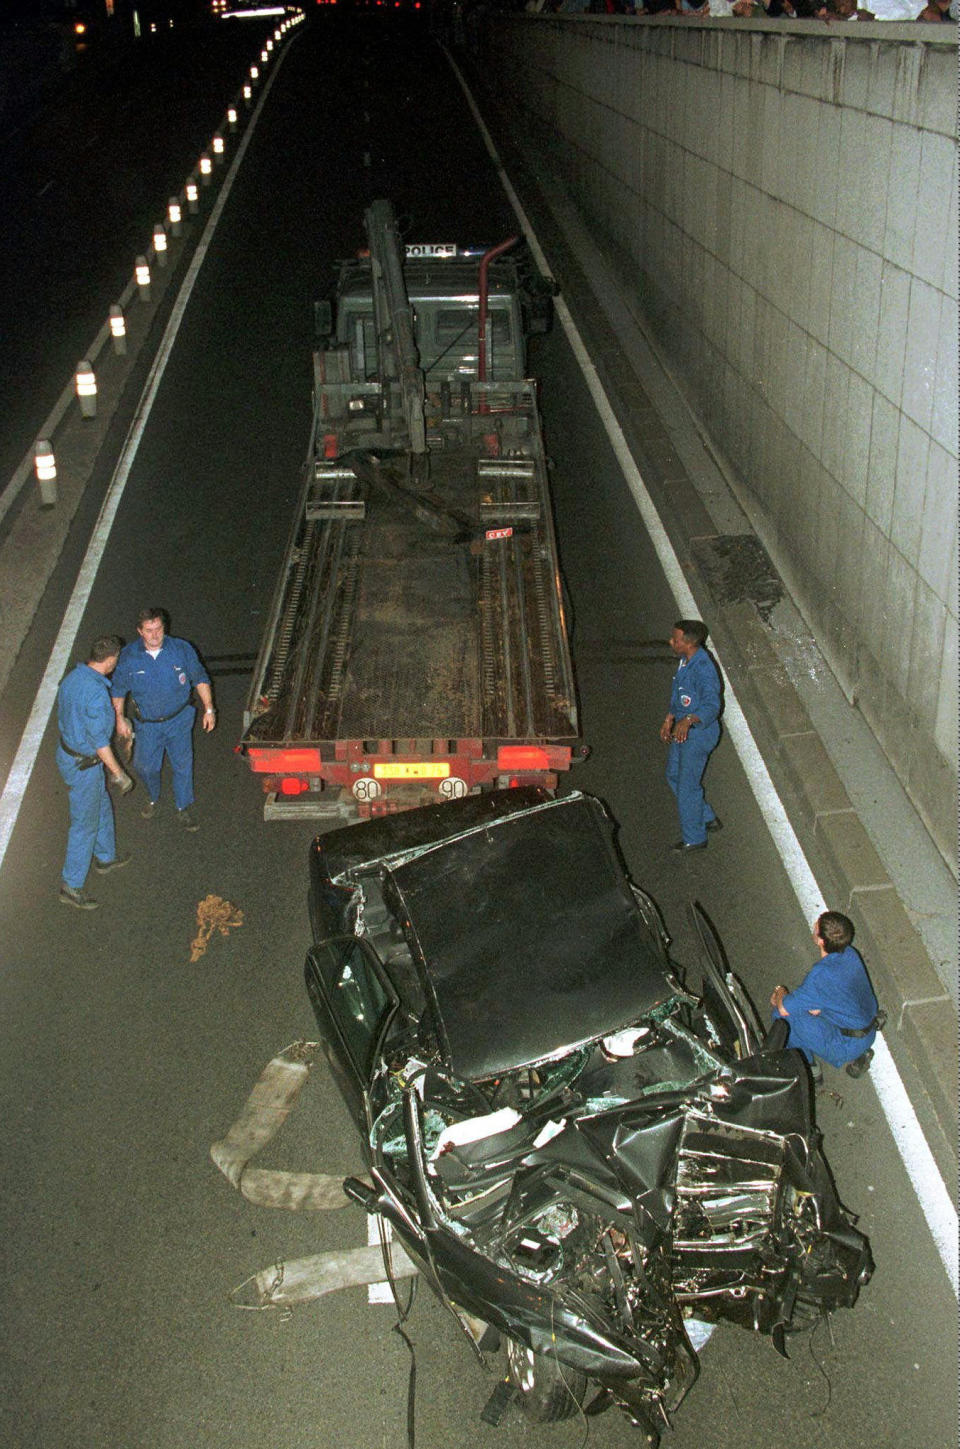 FILE - Police services take away the car in which Diana, Princess of Wales, was seriously injured early Sunday, Aug. 31, 1997 in Paris, in a crash that killed her boyfriend, Dodi Fayed, and the driver. The story of Princess Diana's death at age 36 in that catastrophic crash in a Paris traffic tunnel continues to shock, even a quarter-century later. (AP Photo/Jerome Delay, File)